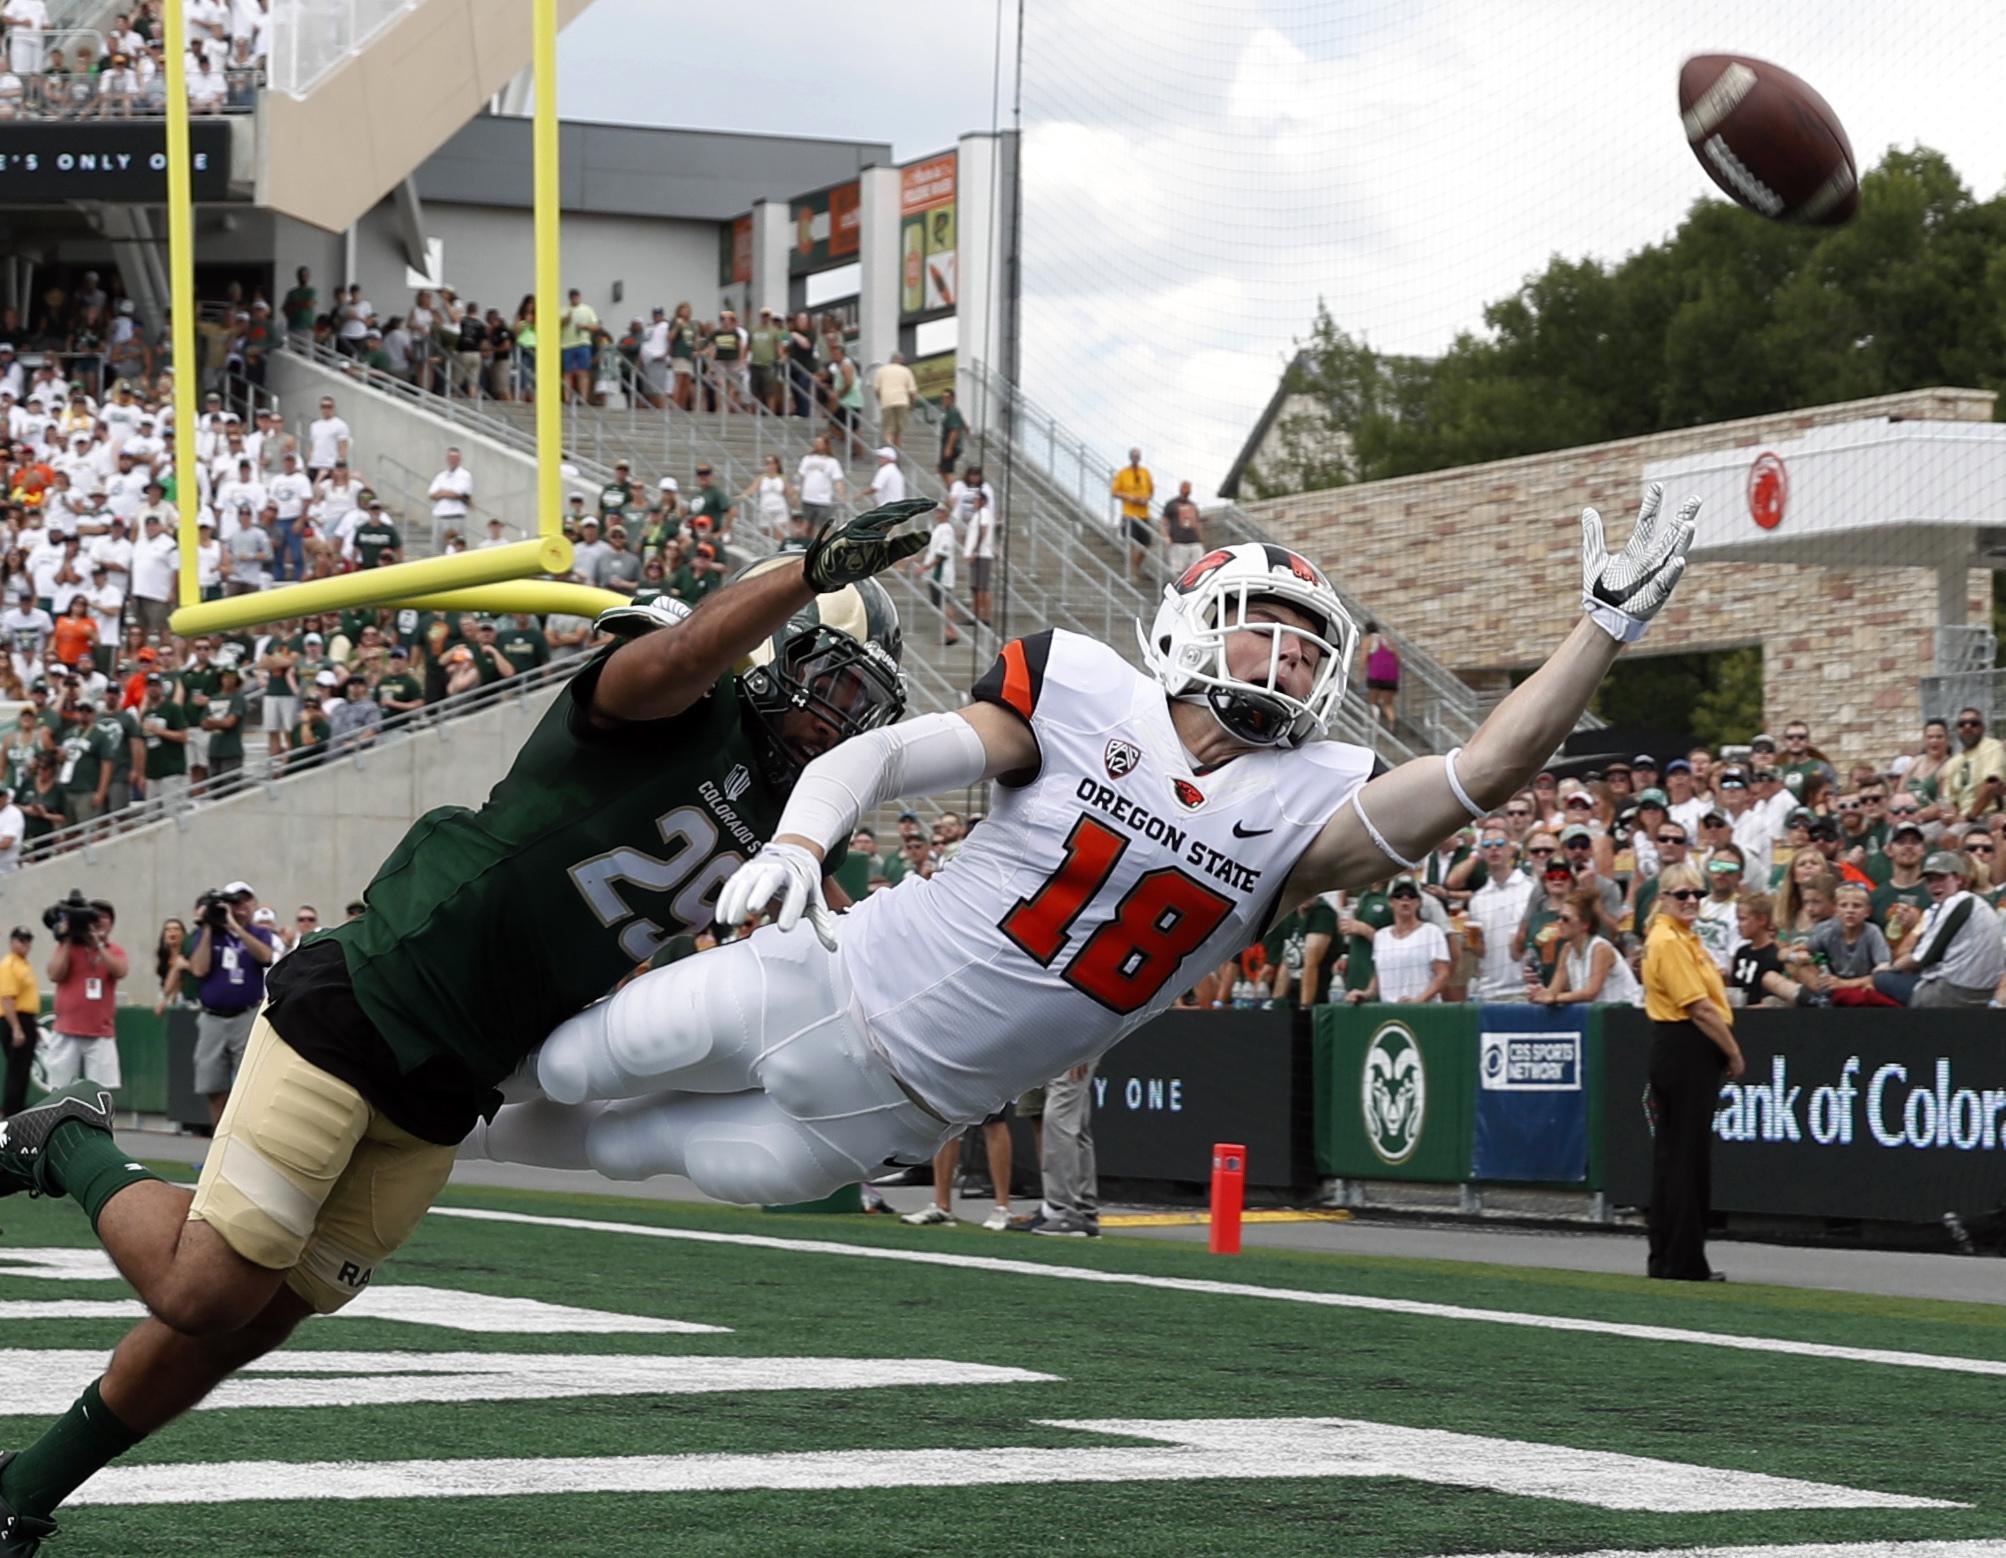 Colorado State opens new stadium by beating Oregon State 58-27 | SWX Right Now - Sports for